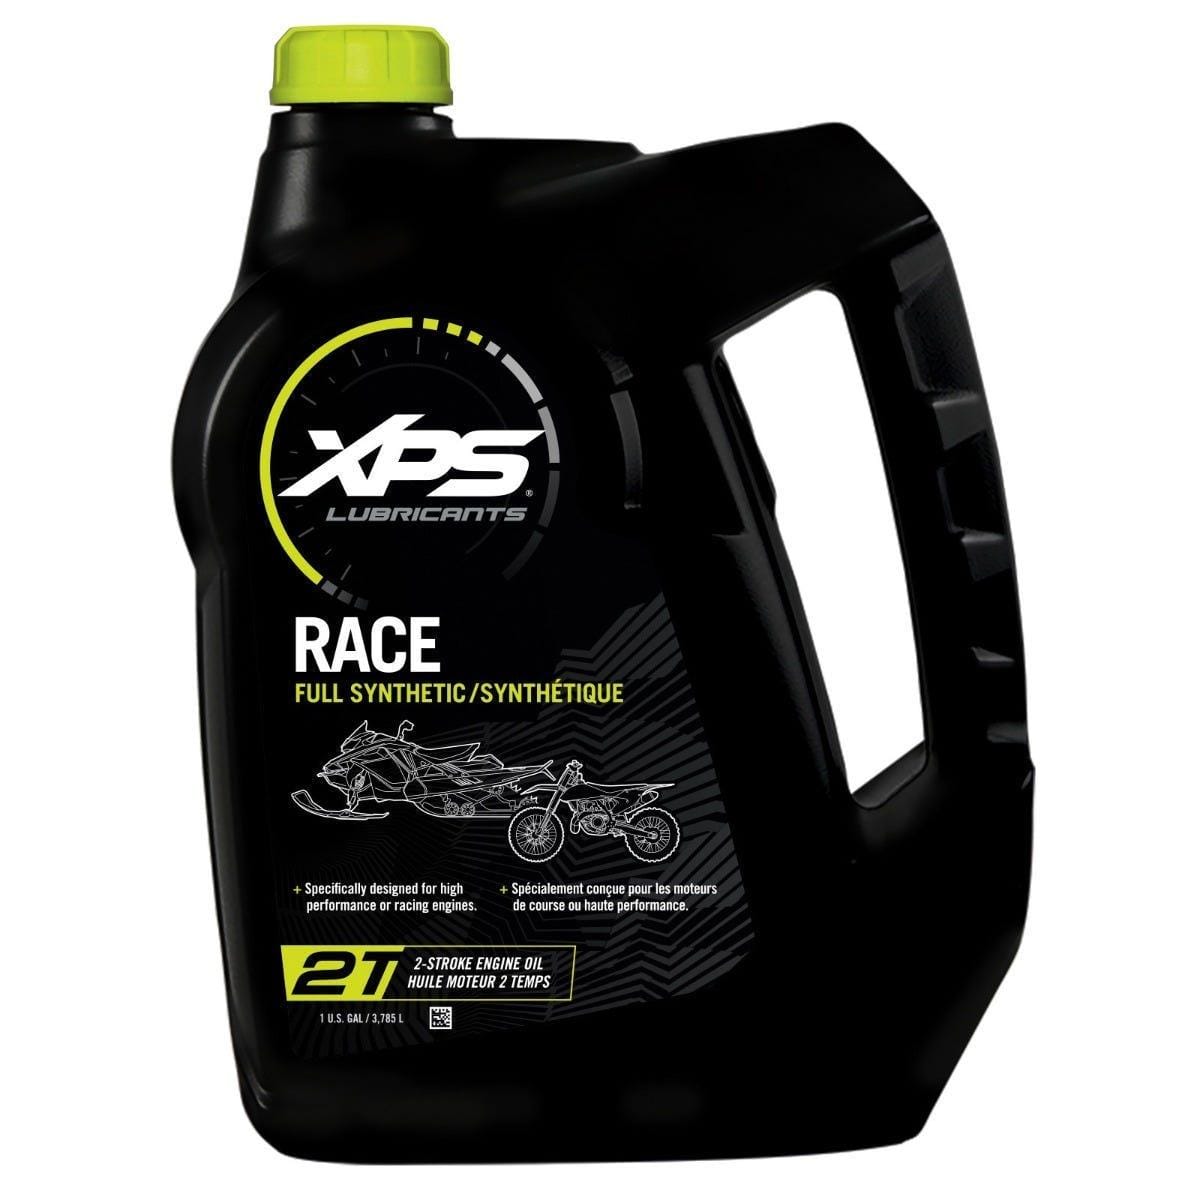 2T Racing Synthetic Oil / 1 US gal. - Factory Recreation